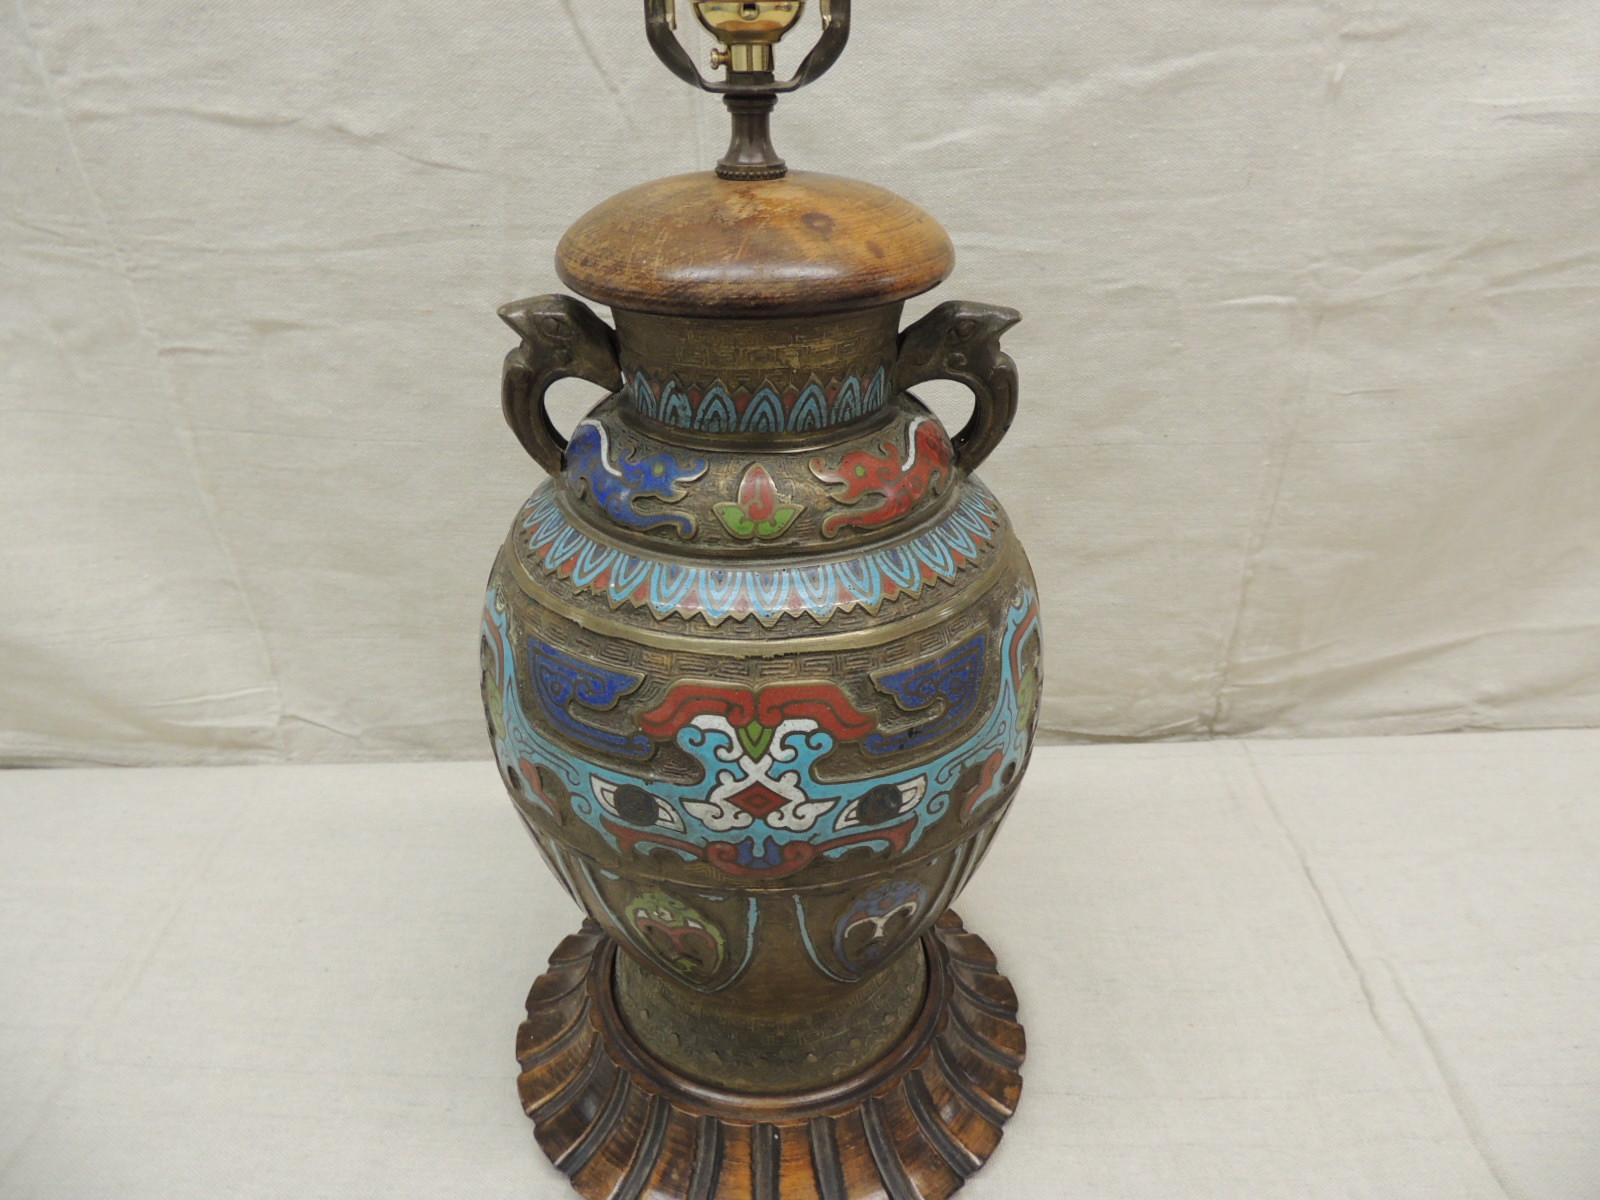 Antique cloisonné table lamp with enamel in shades of turquoise, red, white, green and purple. Cloisonné lamp base rests on a hand carved wood round base with a wood topper. Lamp offered with a harp no shade. Newly rewired with a three-way light